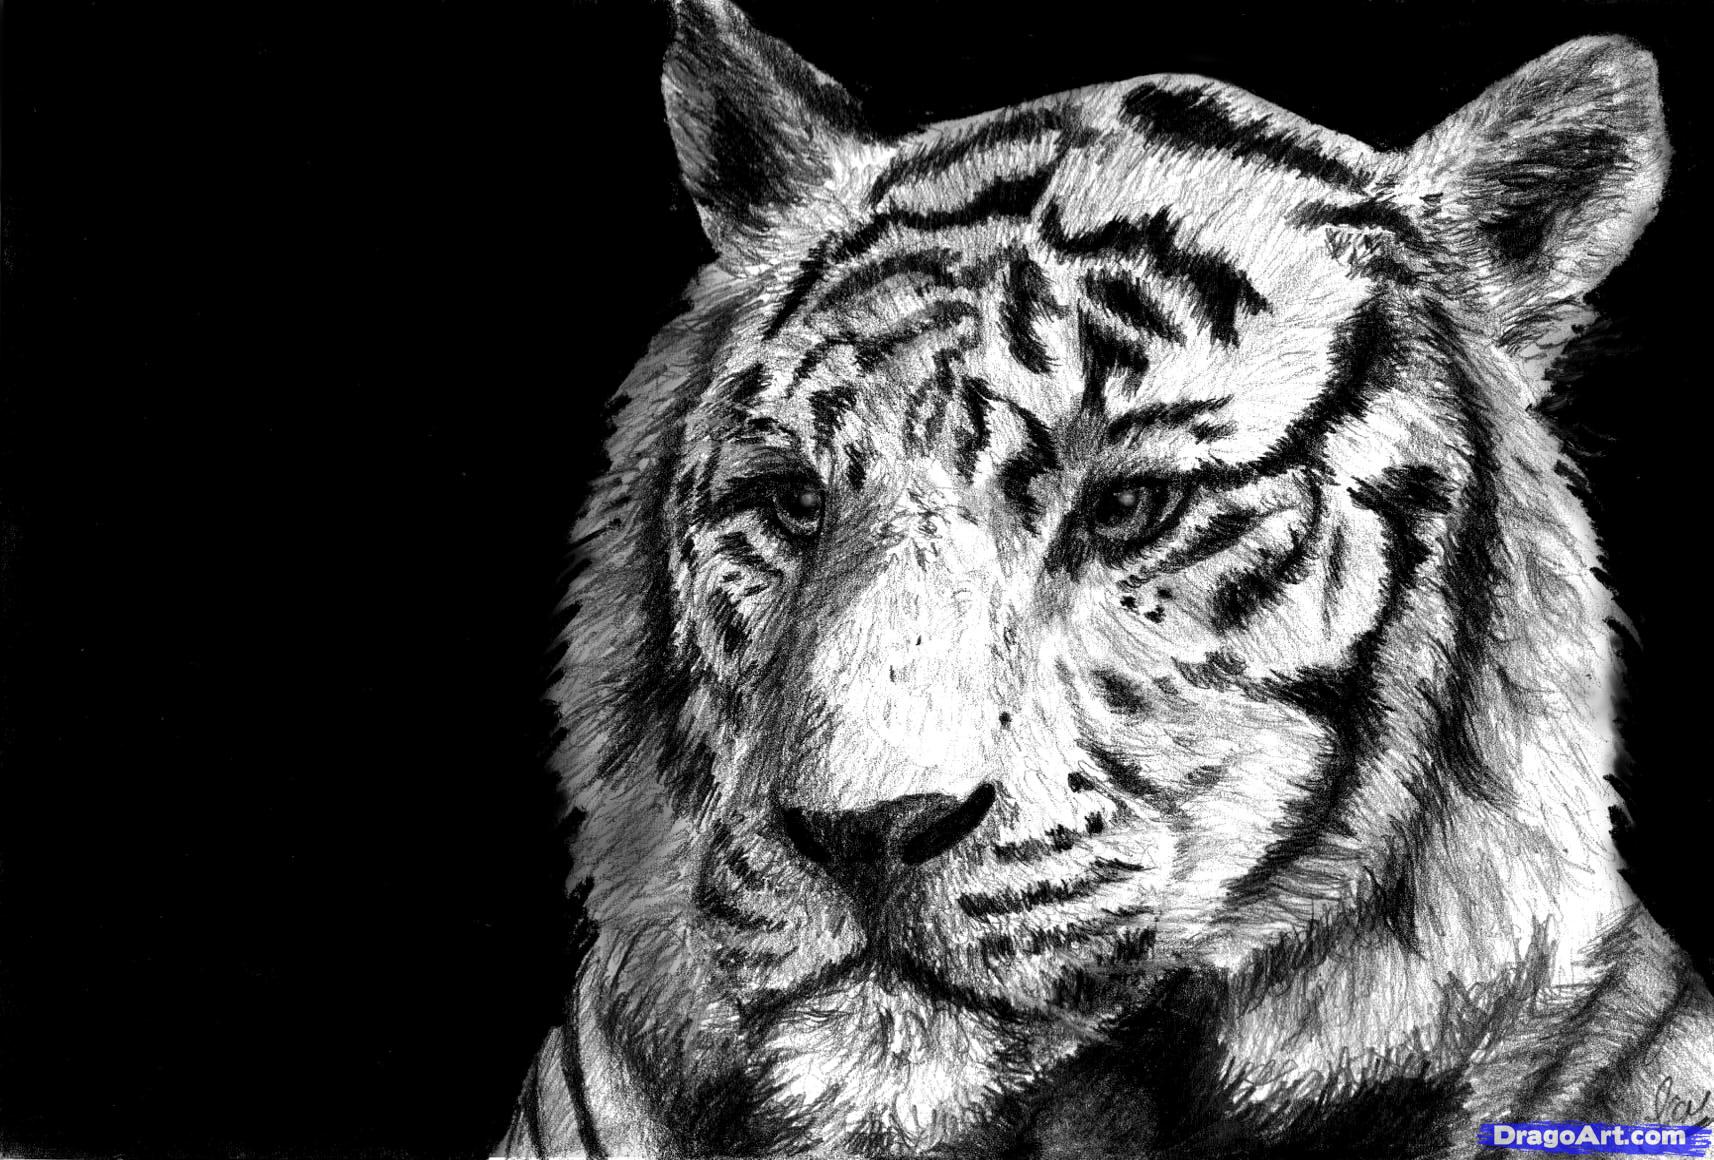 How to Draw a White Tiger, Draw a Tiger in Pencil, Step by Step ...